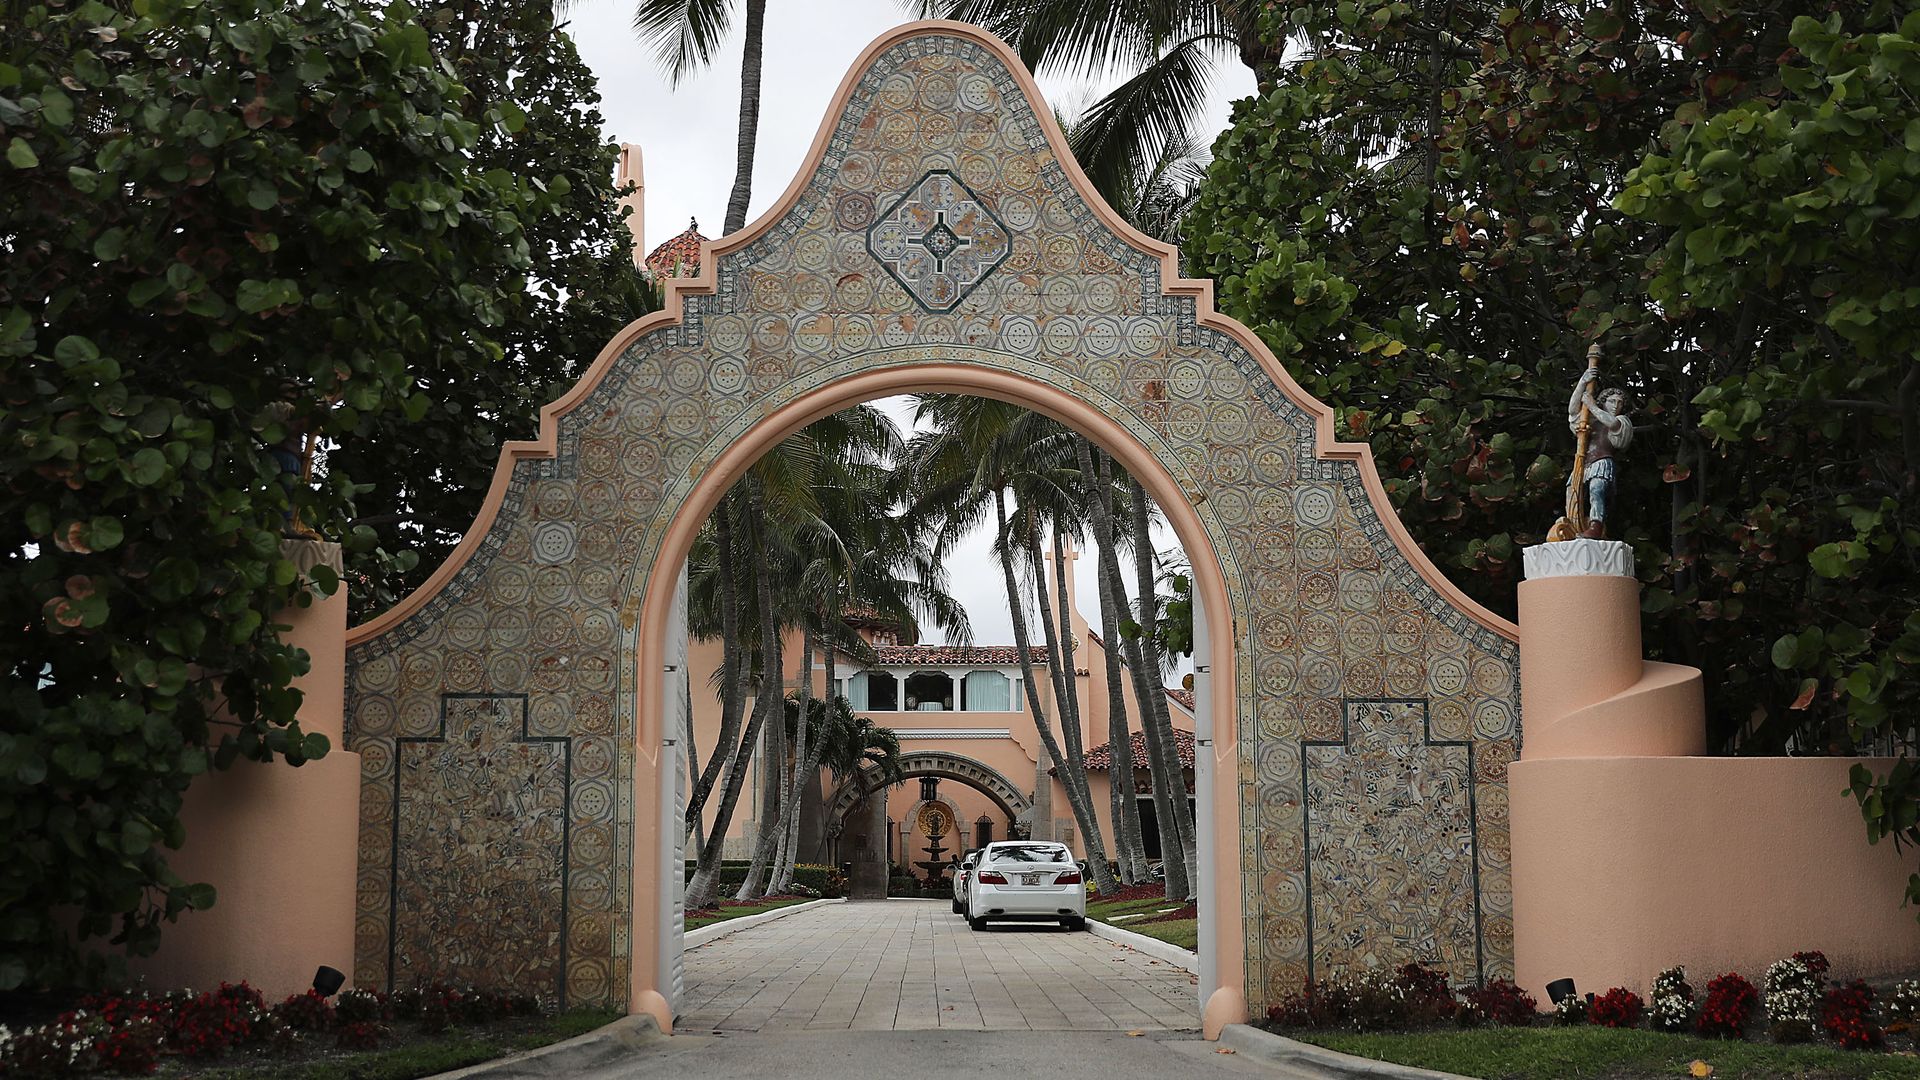 This image shows a stone entranceway to Mar-a-lago, framed by palm trees.